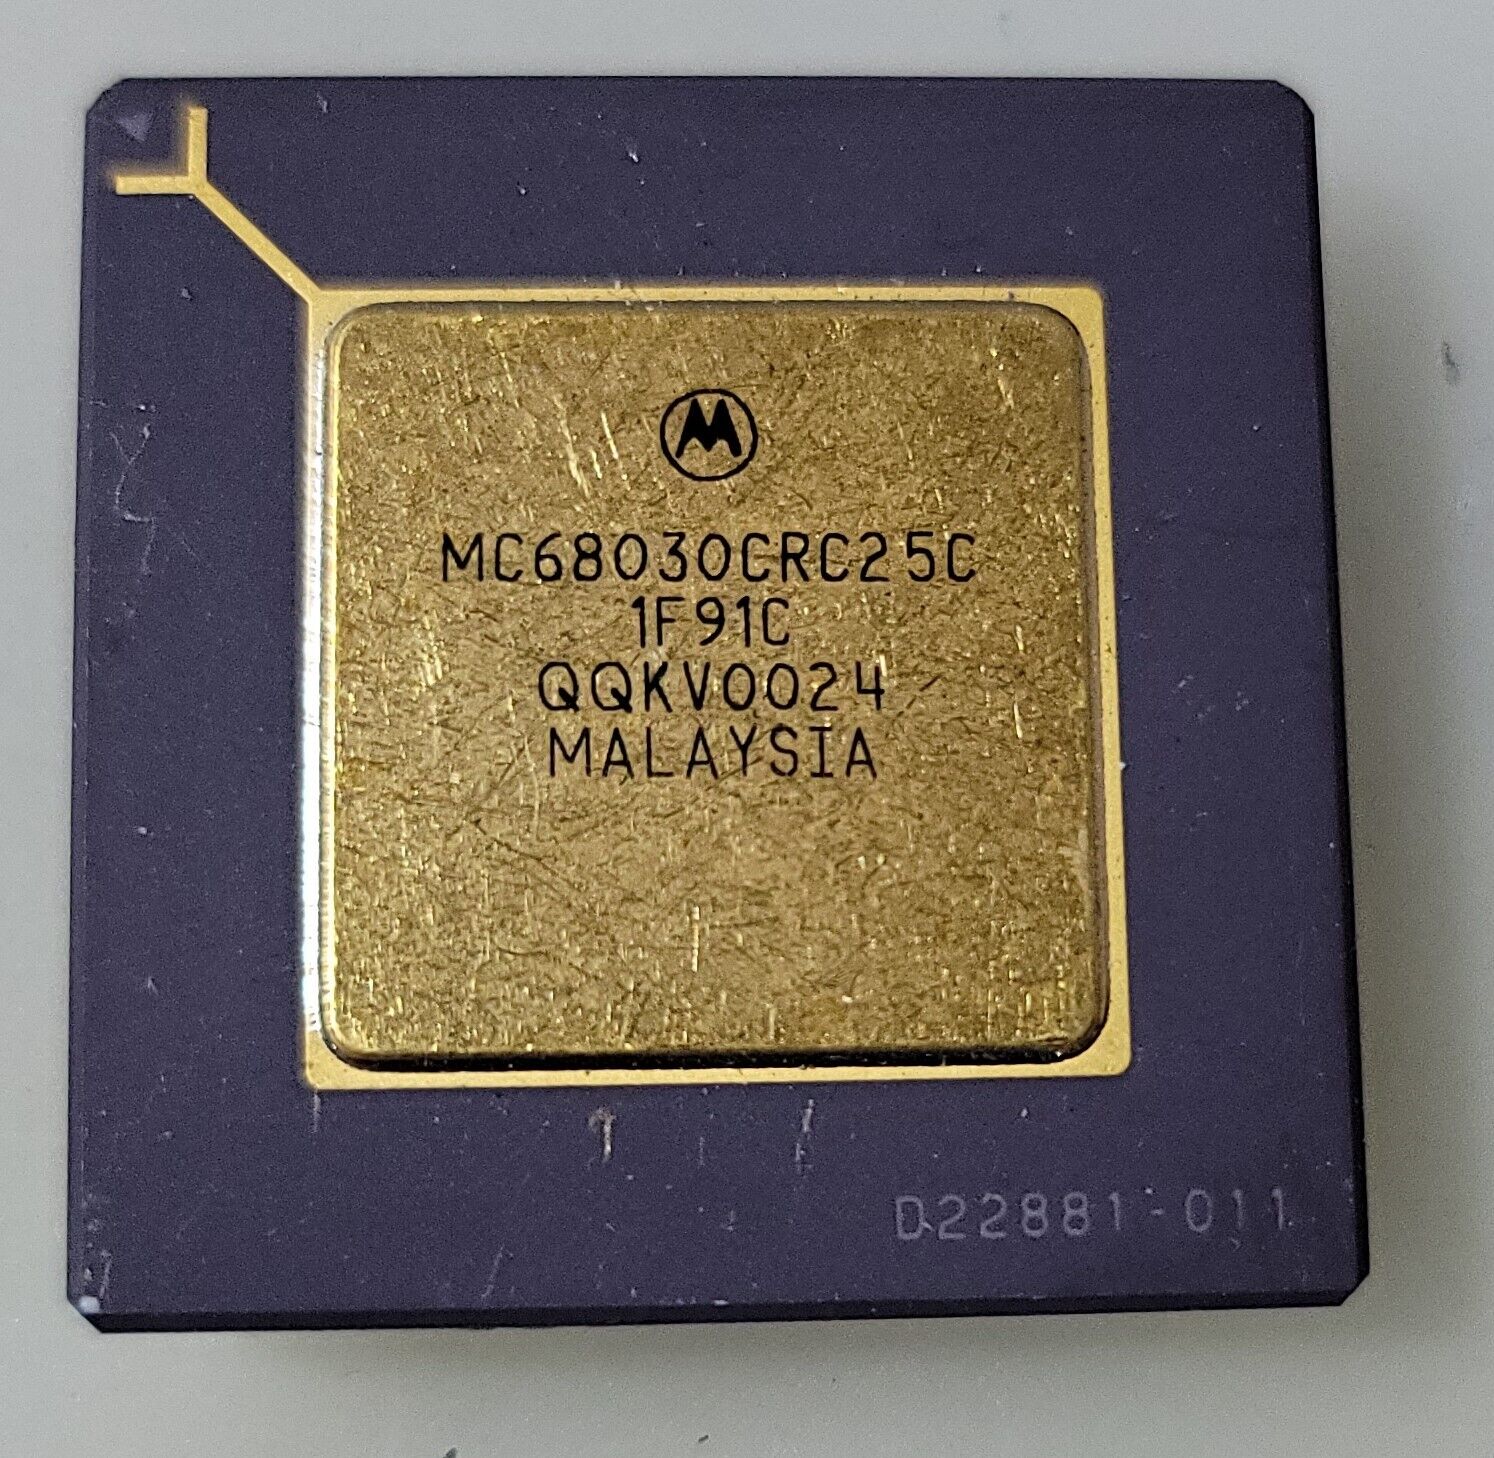 Vintage Rare Motorola MC68030CRC25C Processor For Collection or Gold Recovery